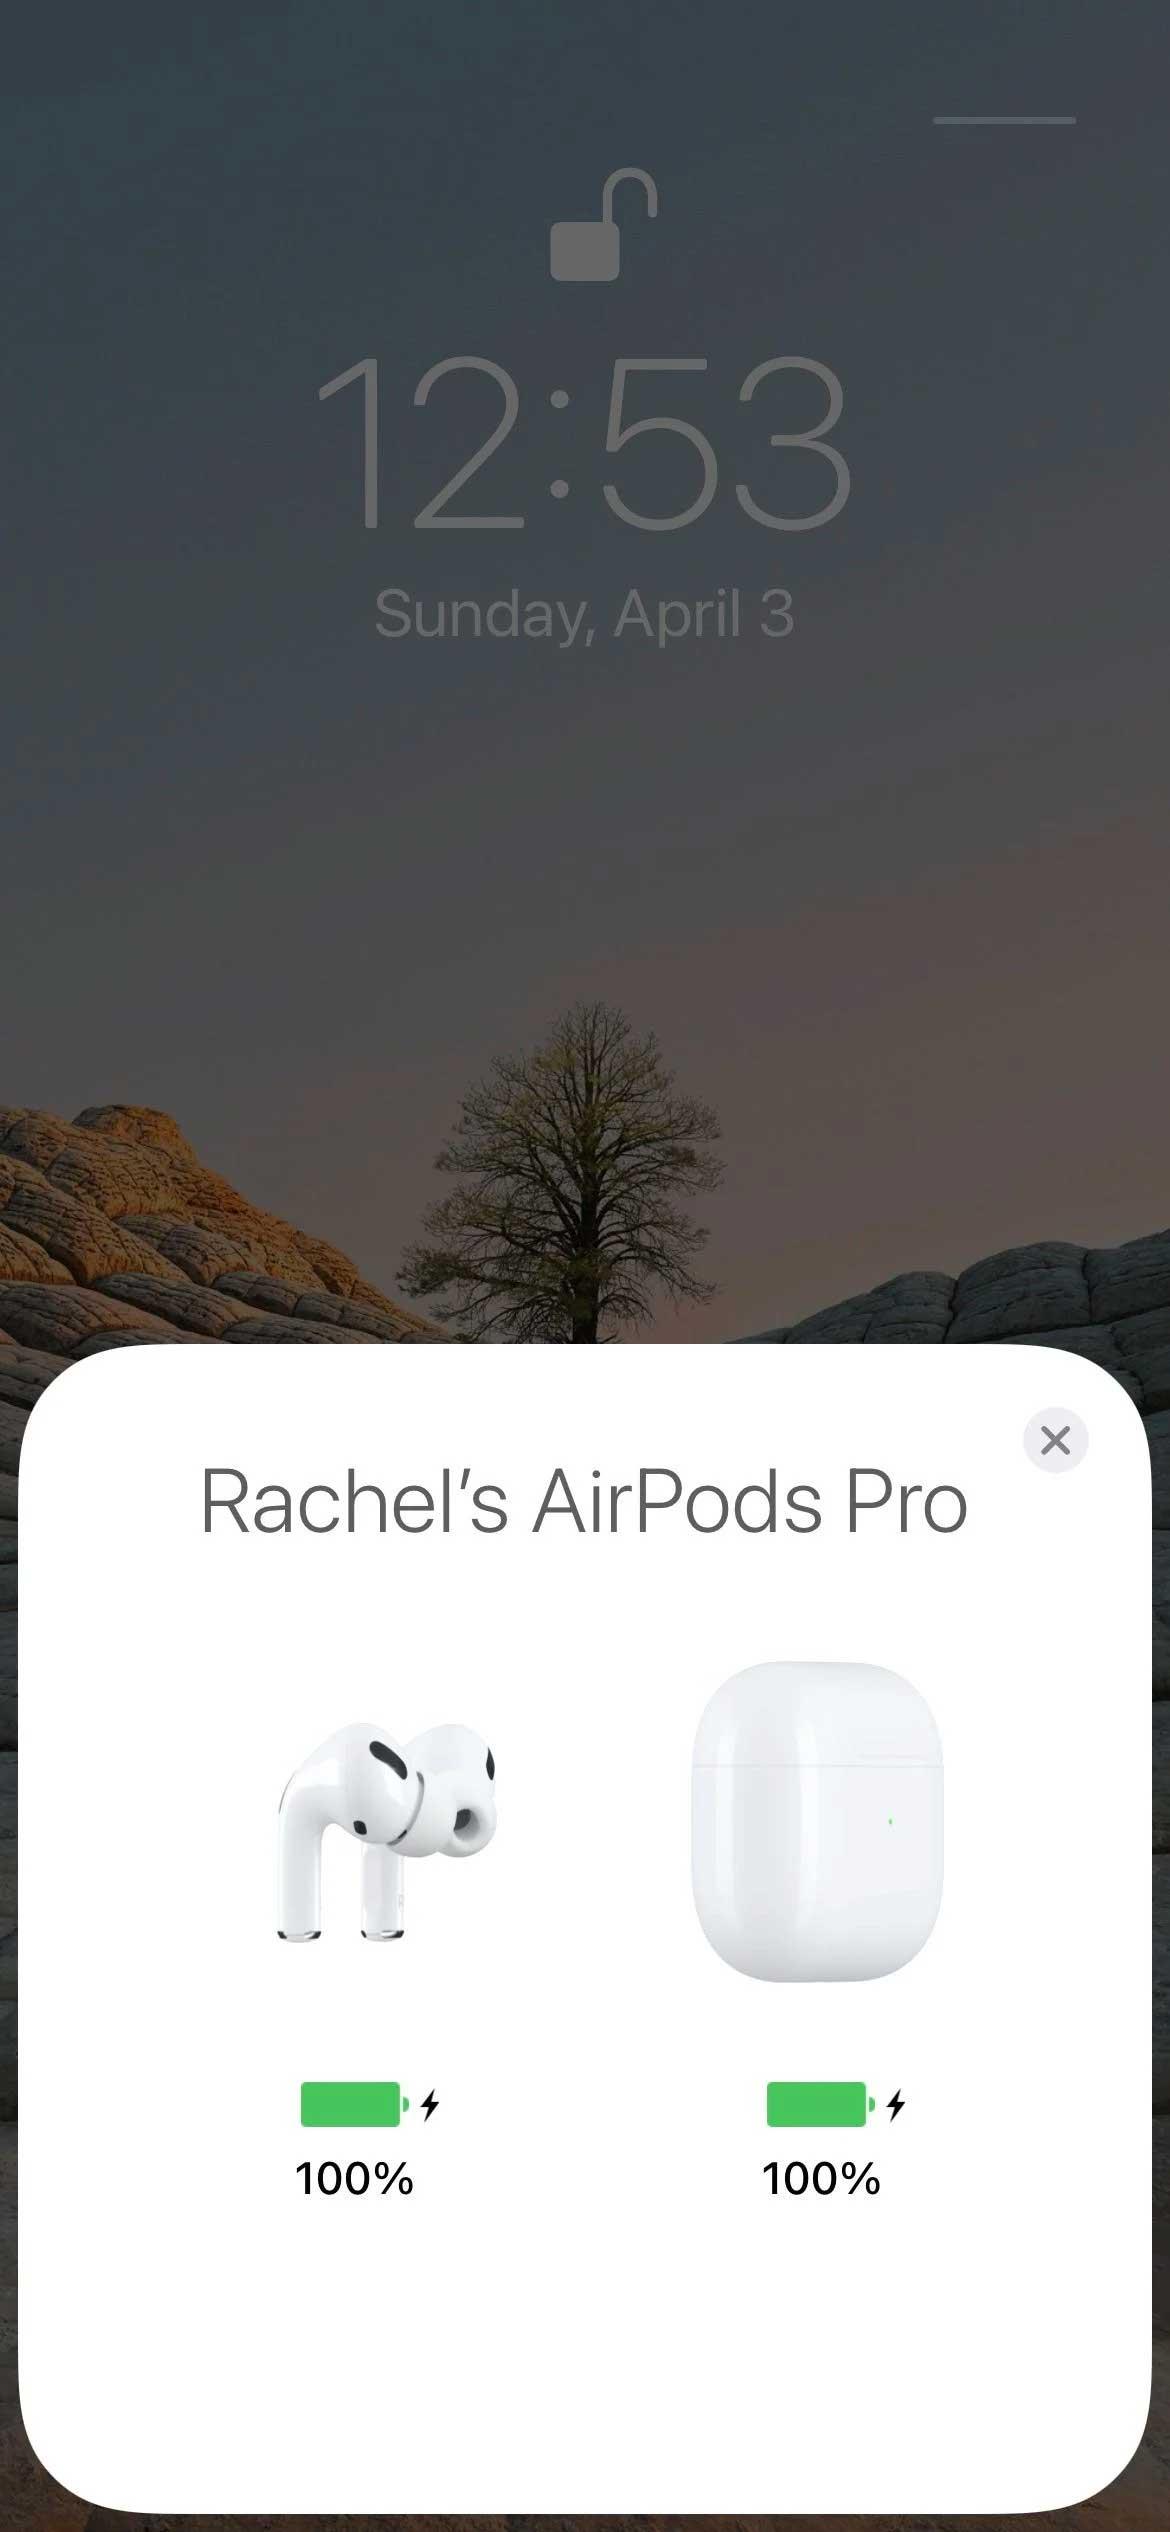 How long does it take to charge AirPods?